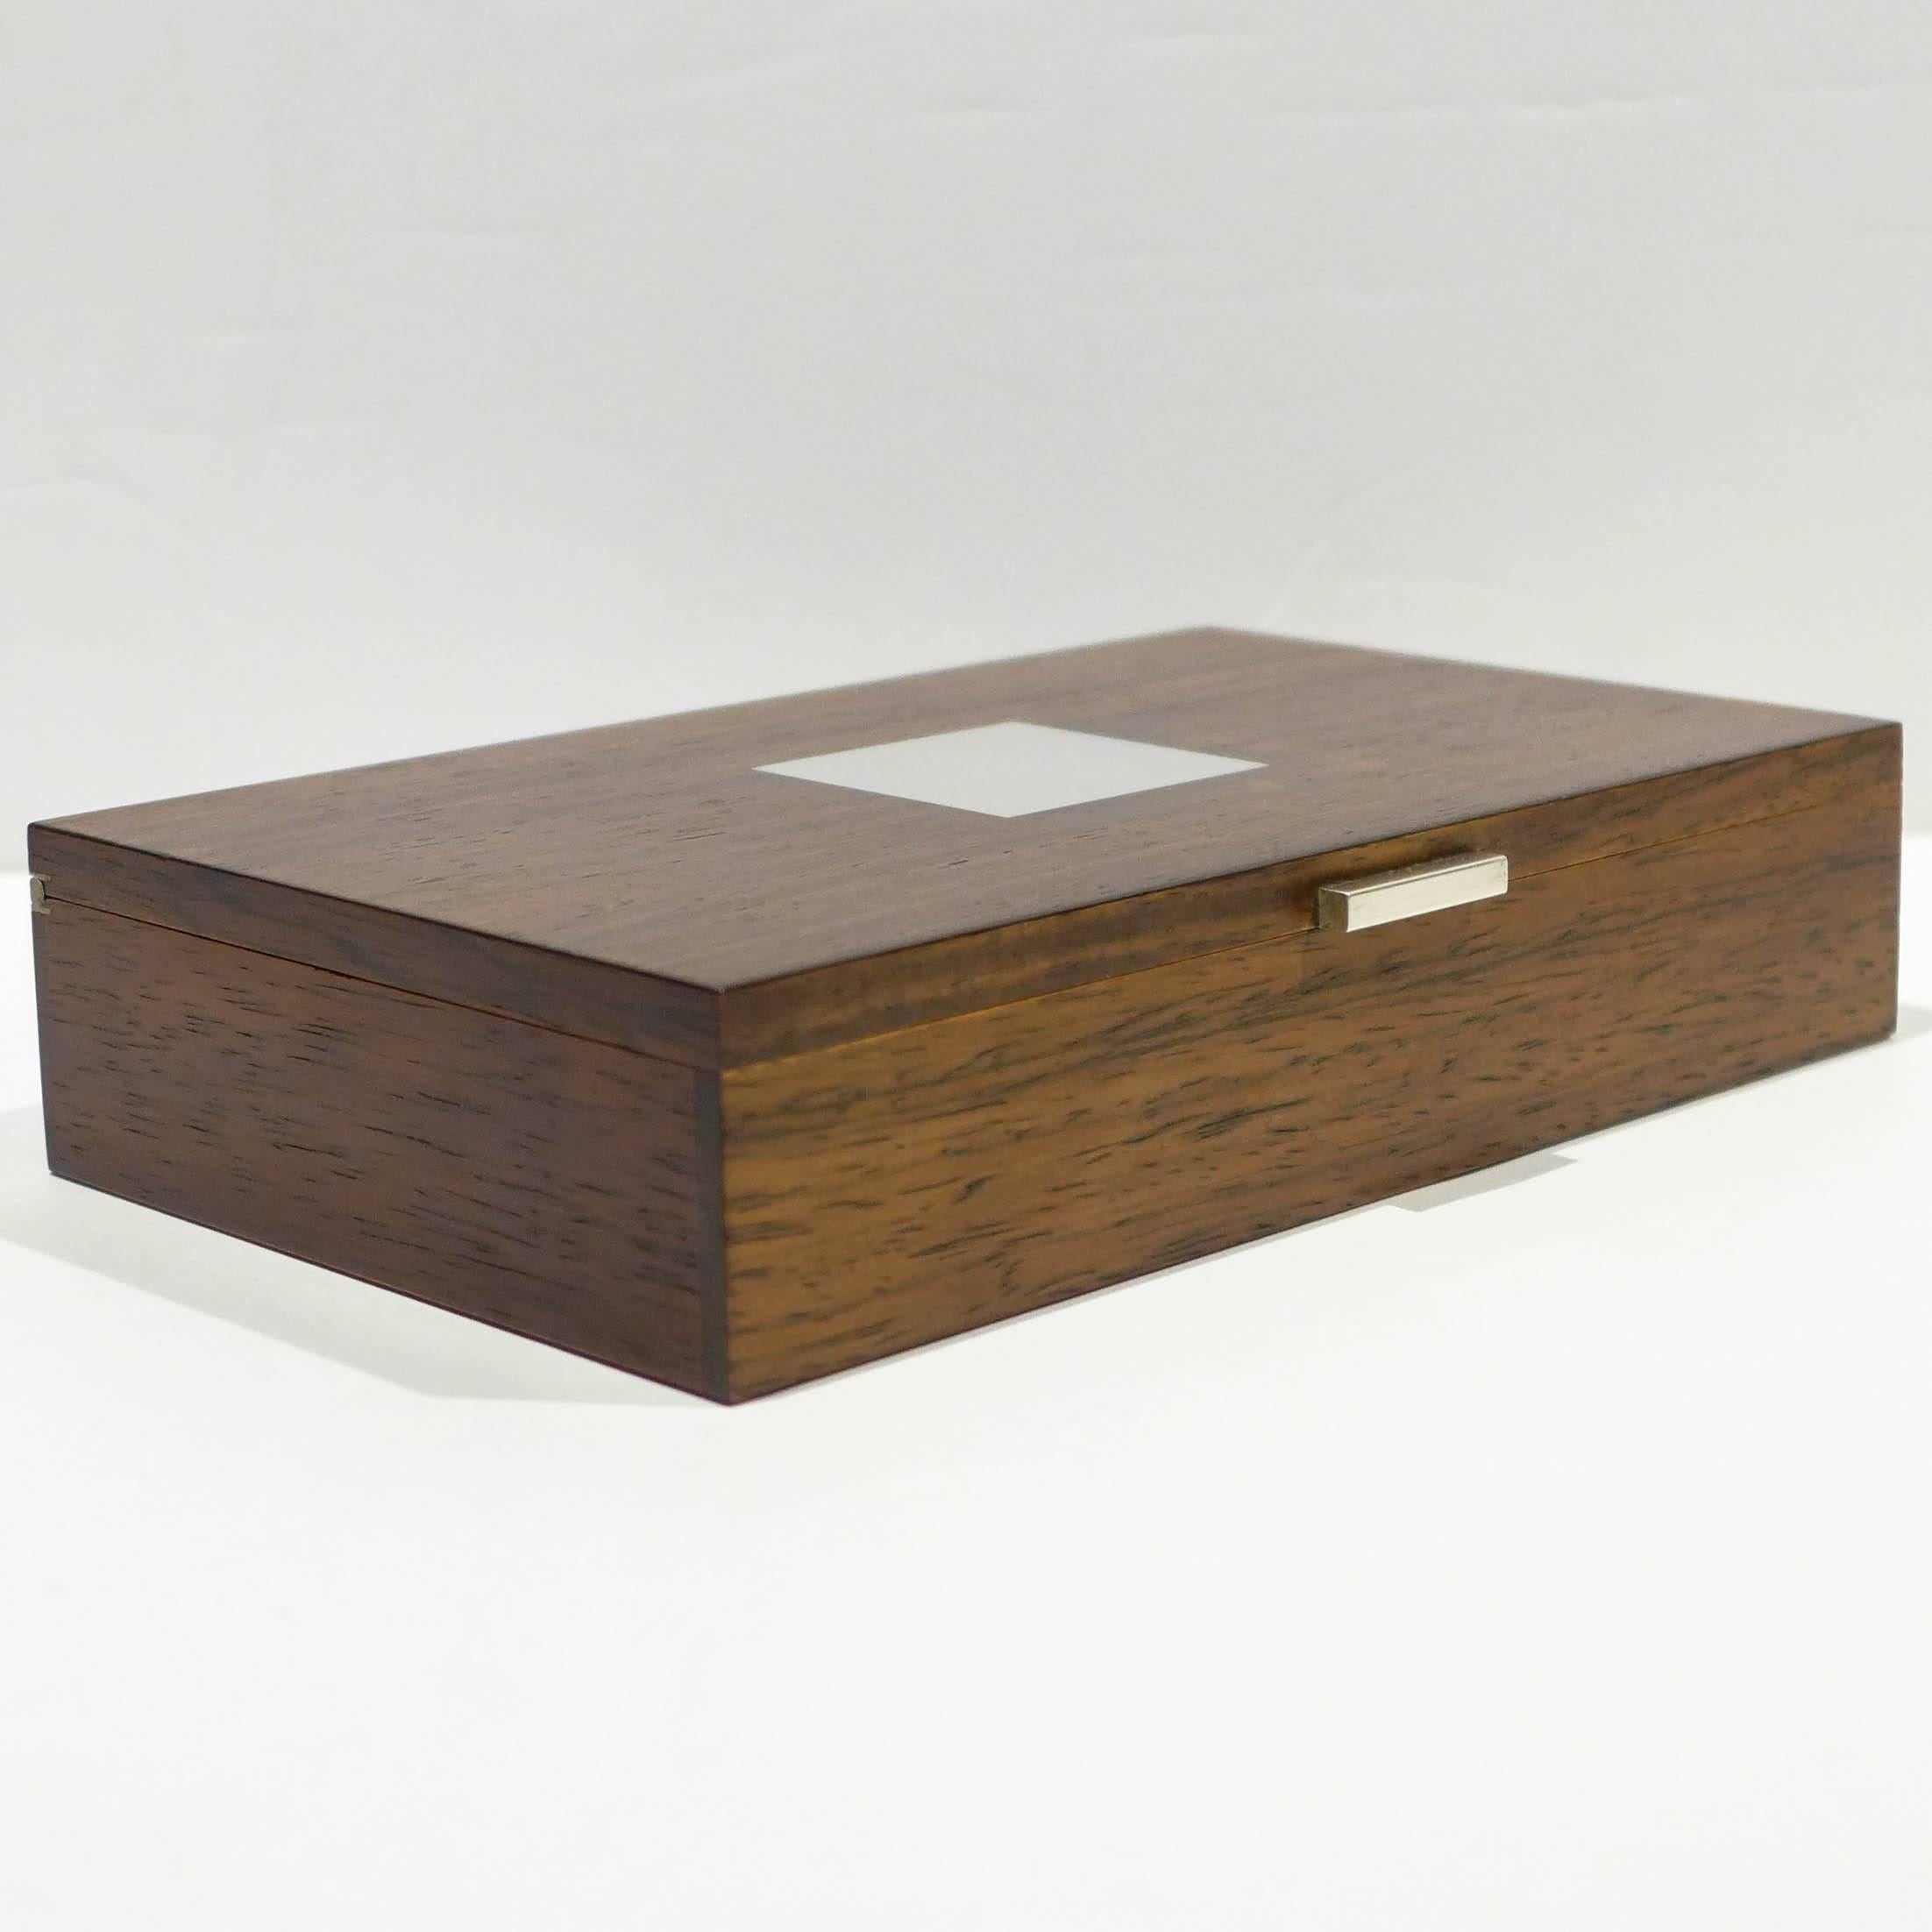 Finely crafted rosewood box with sterling silver inlay and segmented interior by Danish silversmiths Hans Hansen. With silver hallmark underneath.